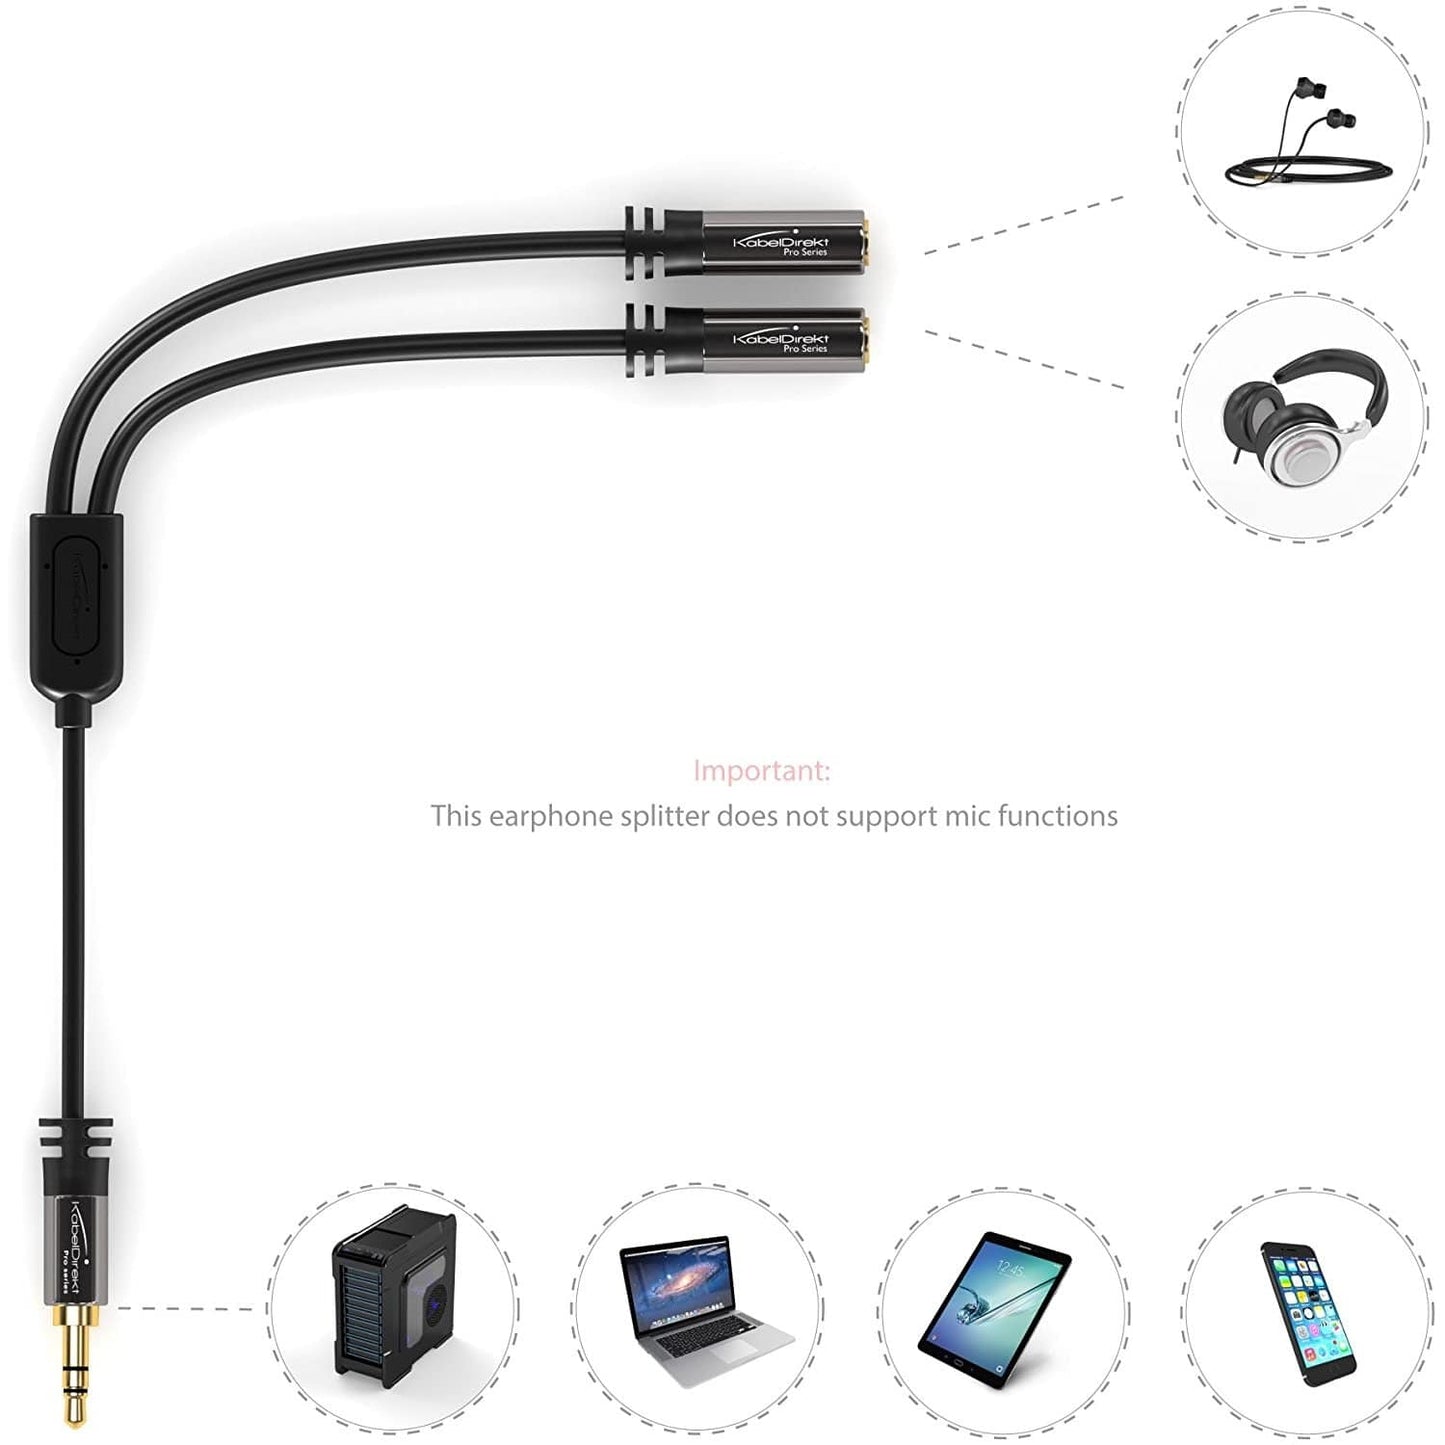 3.5mm Y Adapter - Jack splitter for two headphones, 1×3.5mm male to 2×3.5mm female